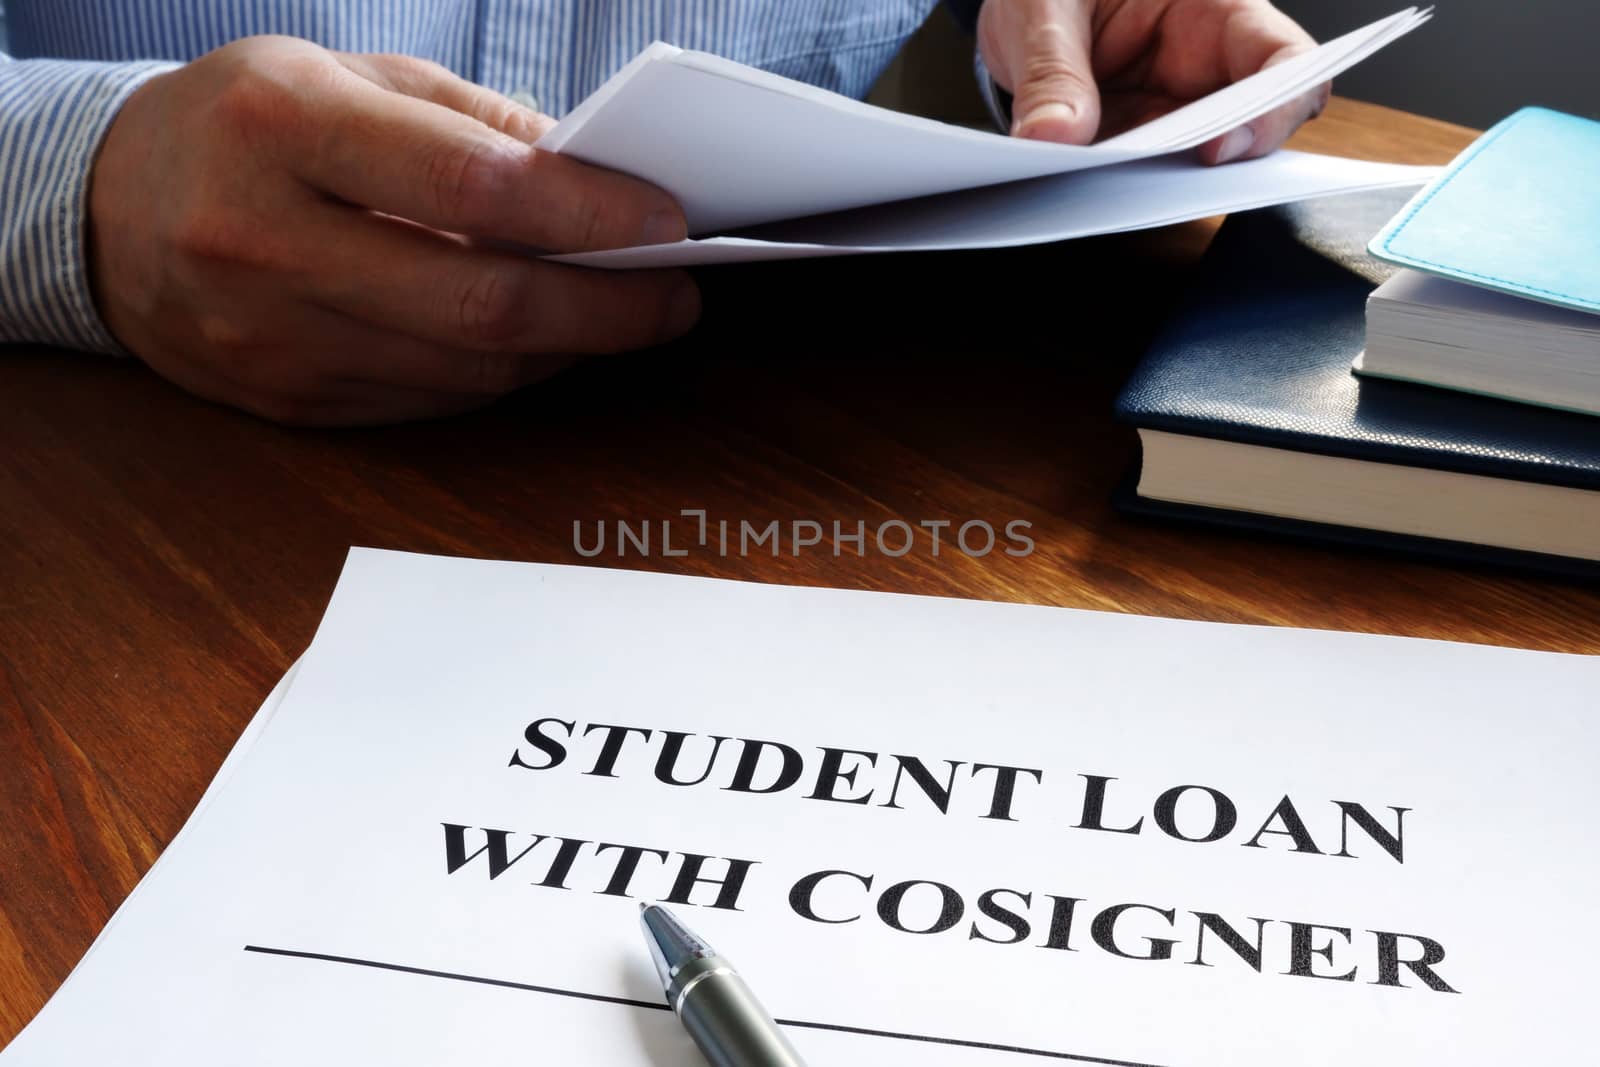 Student loans with cosigner application form and pen. by designer491